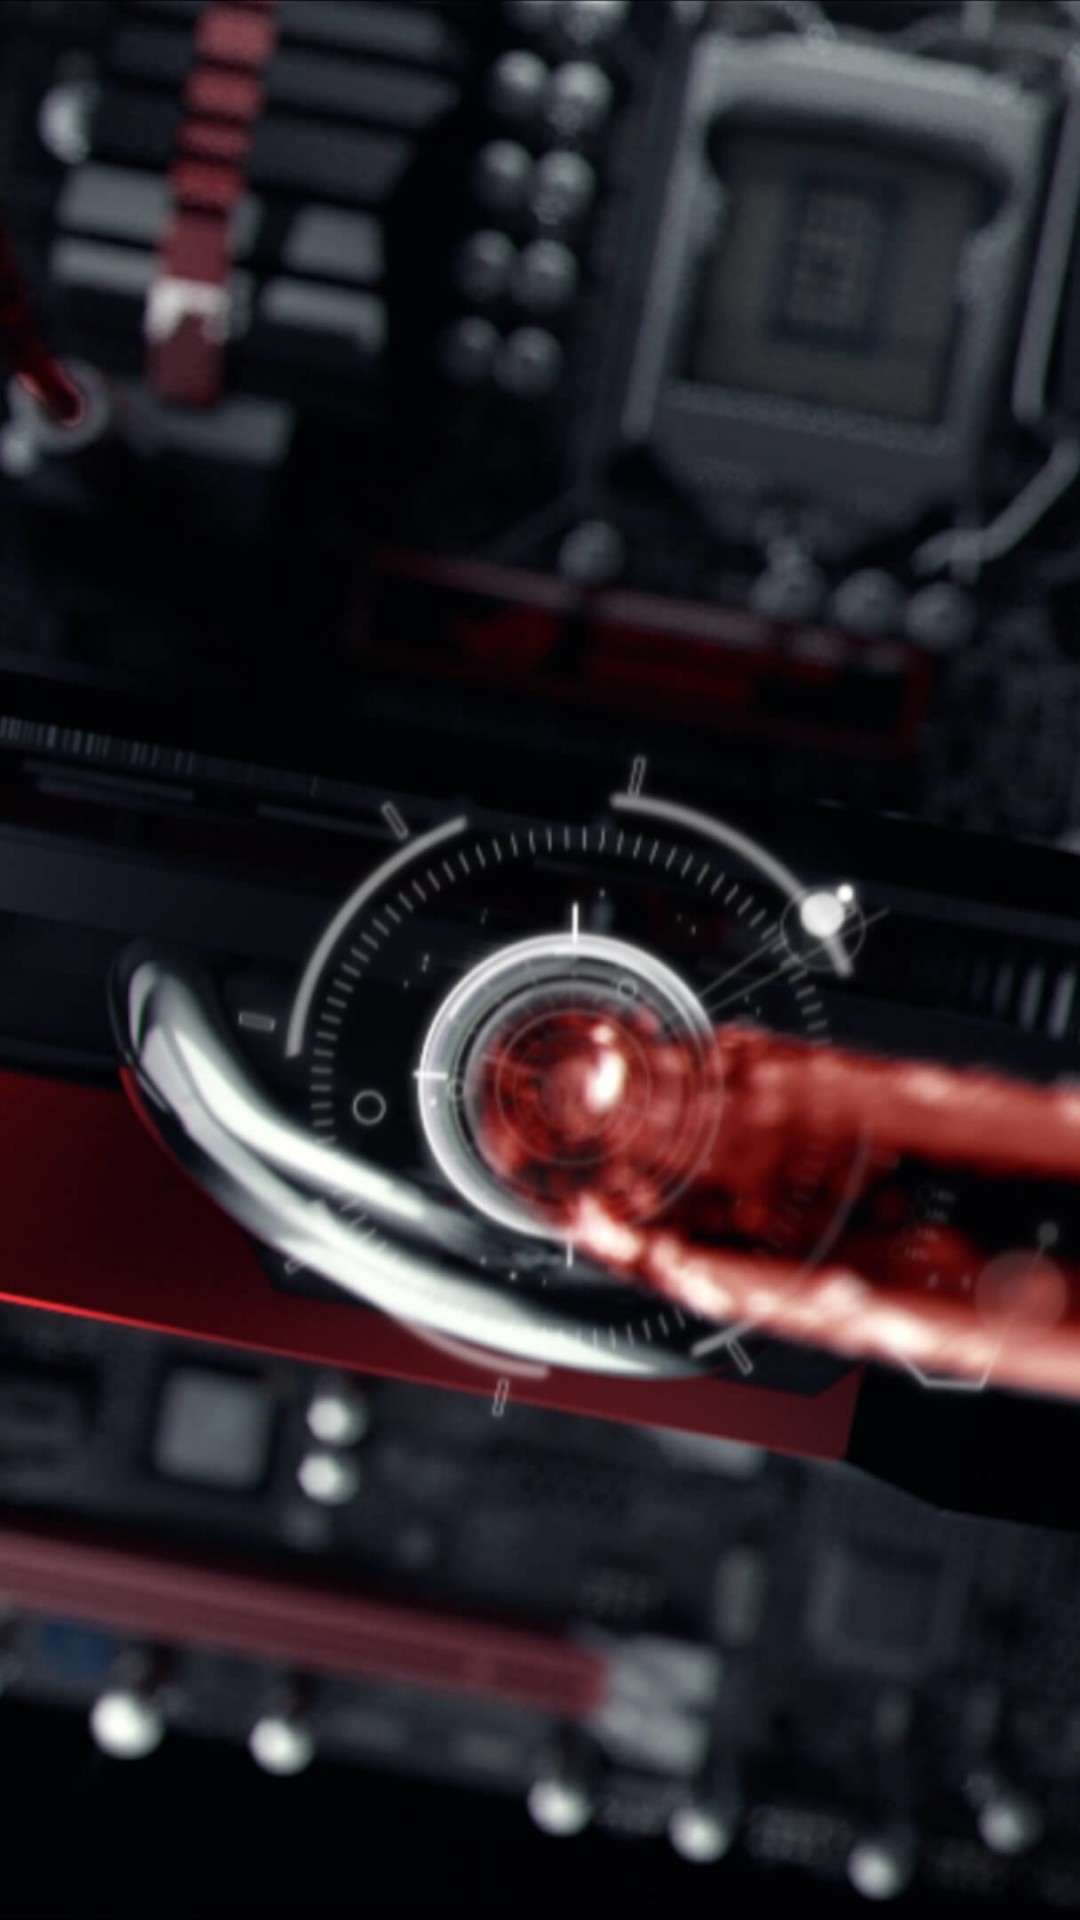 ASUS ROG Poseidon Liquid Cooling Wallpaper for HTC One